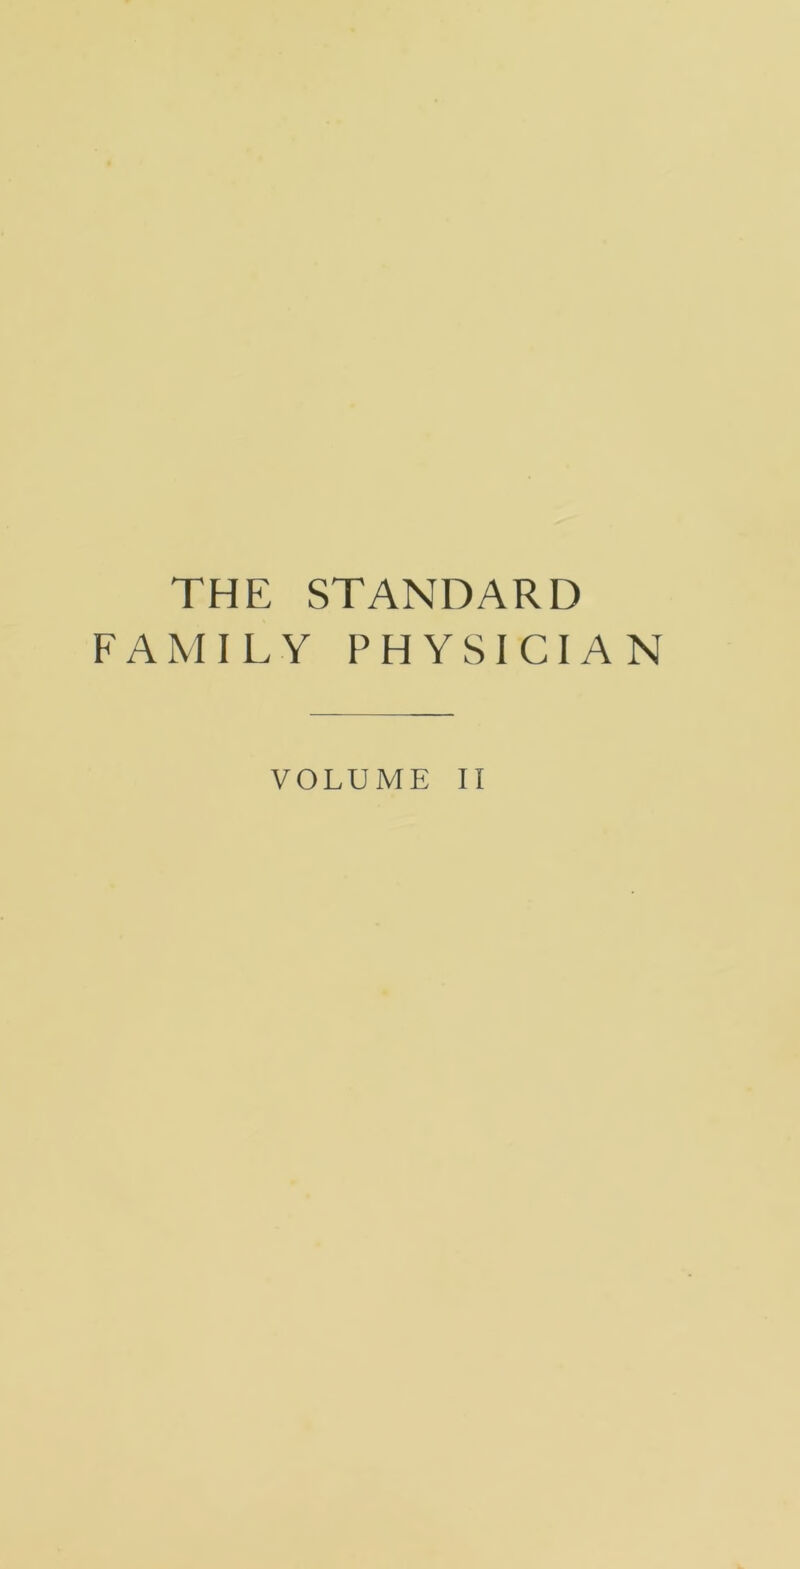 THE STANDARD FAMILY PHYSICIAN VOLUME II